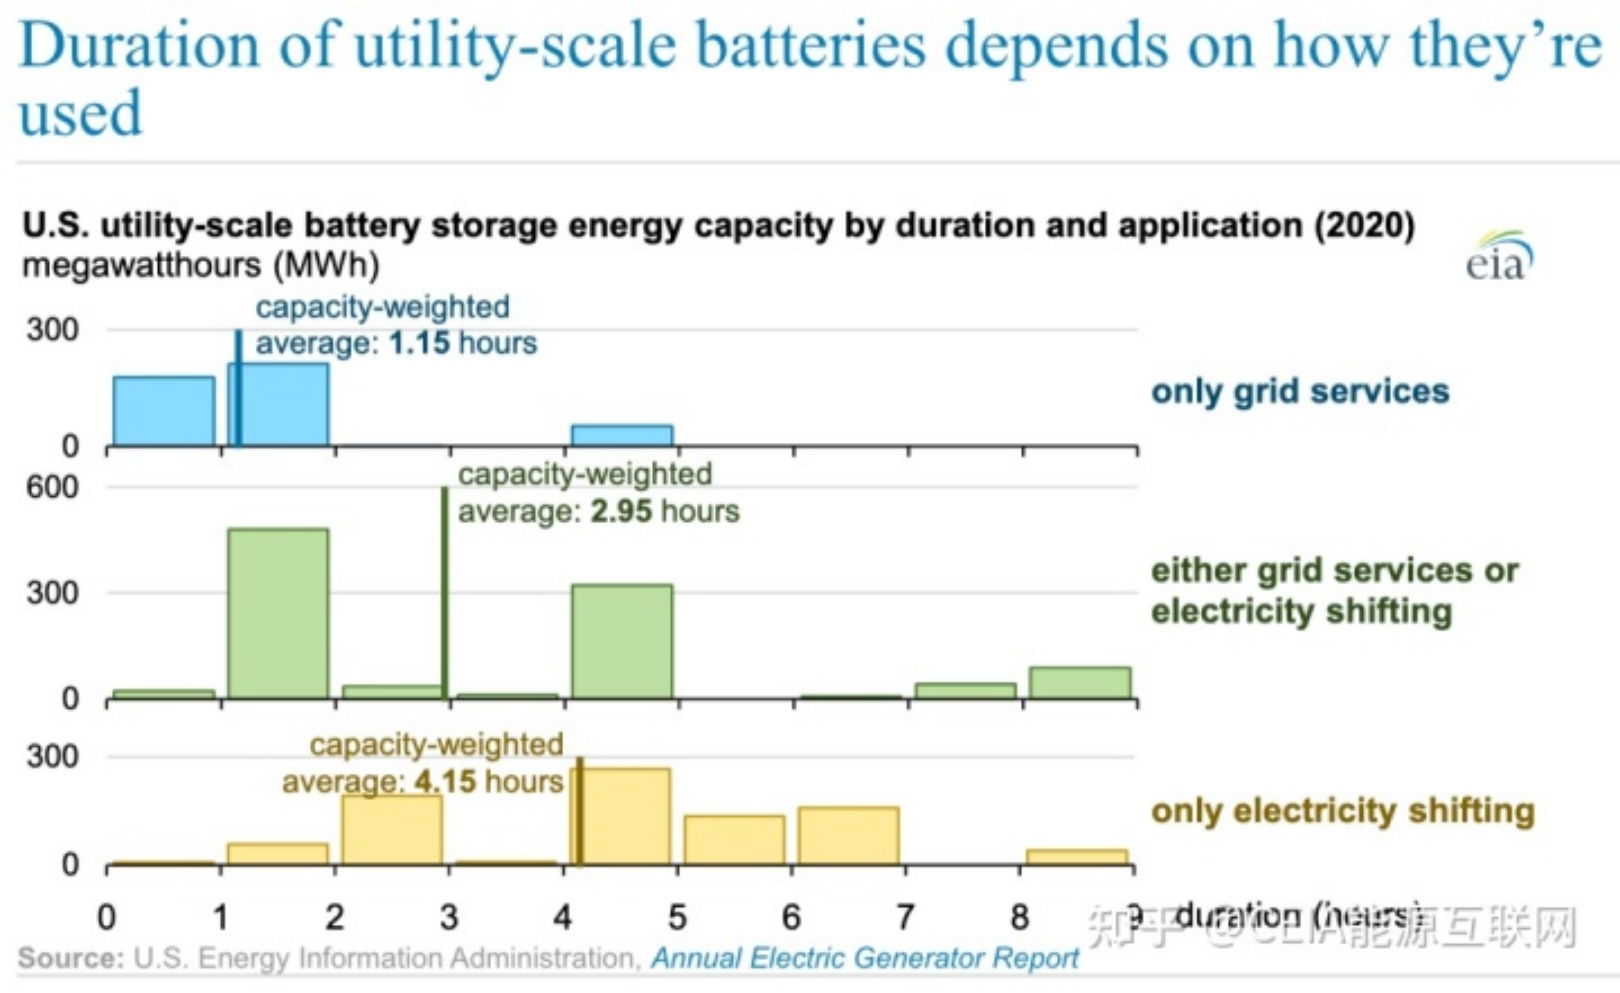 What are the uses of U.S. utility-scale energy storage batteries?